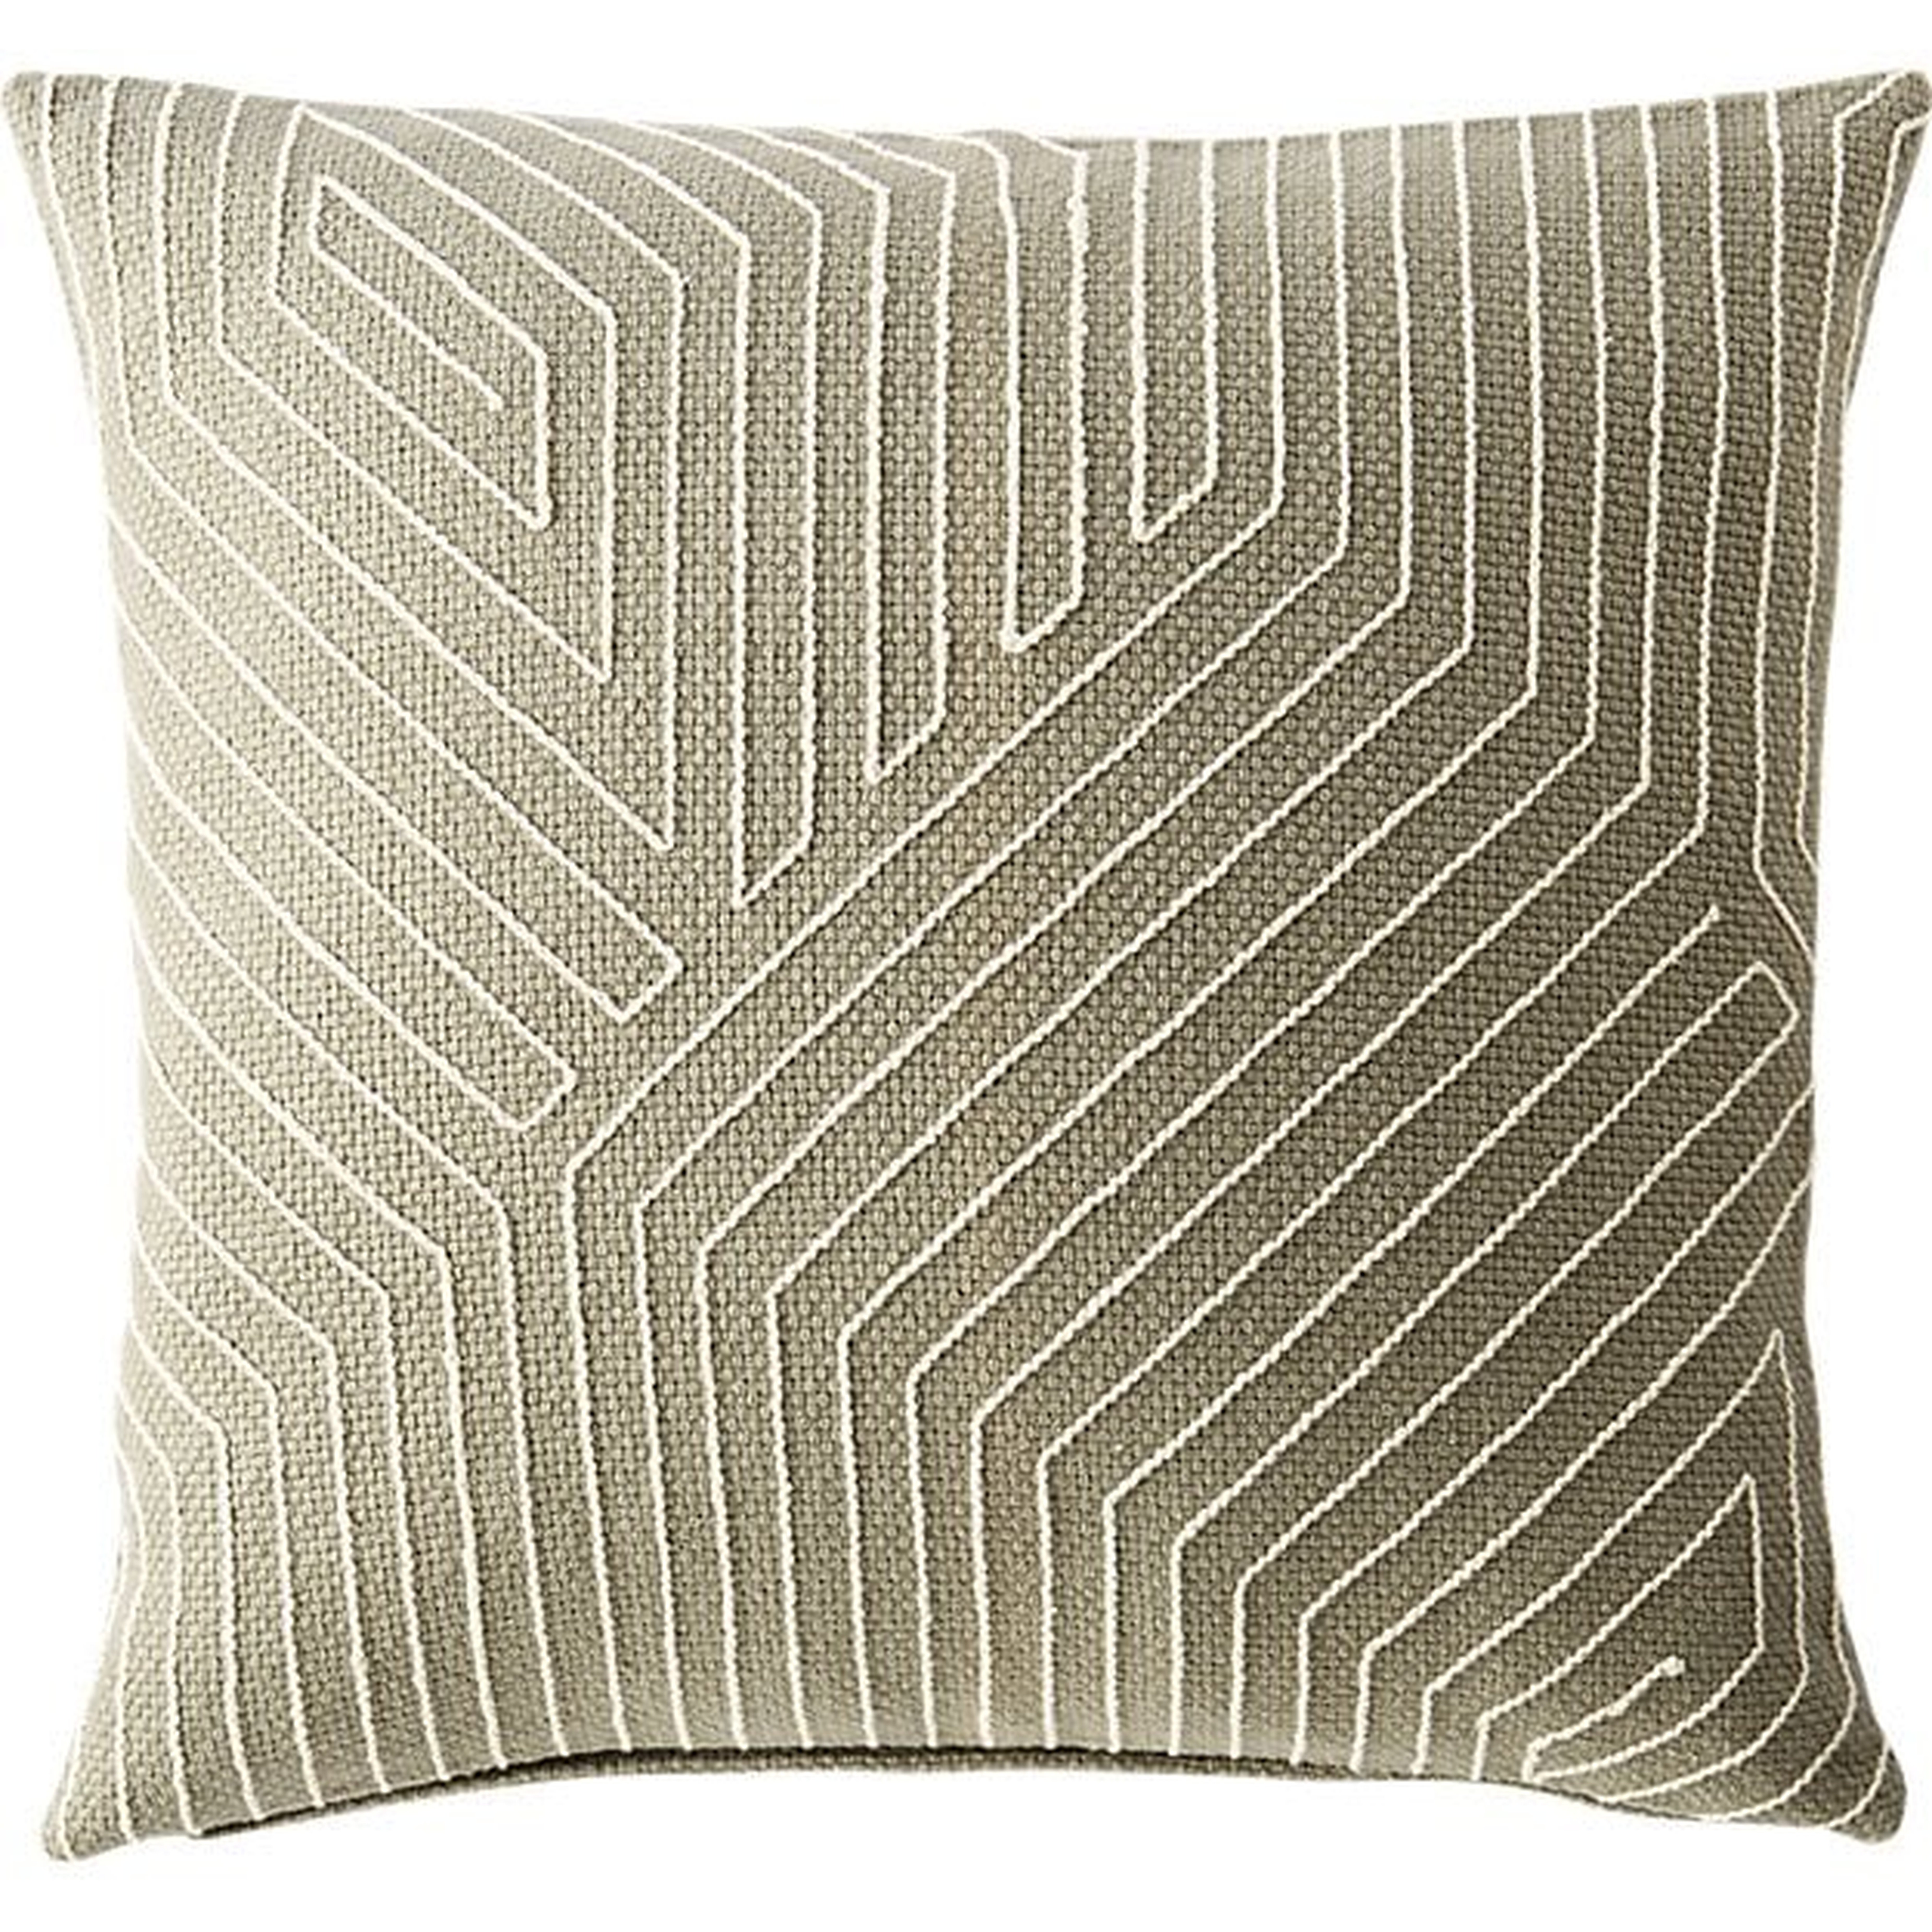 network 18" pillow with feather-down insert - CB2